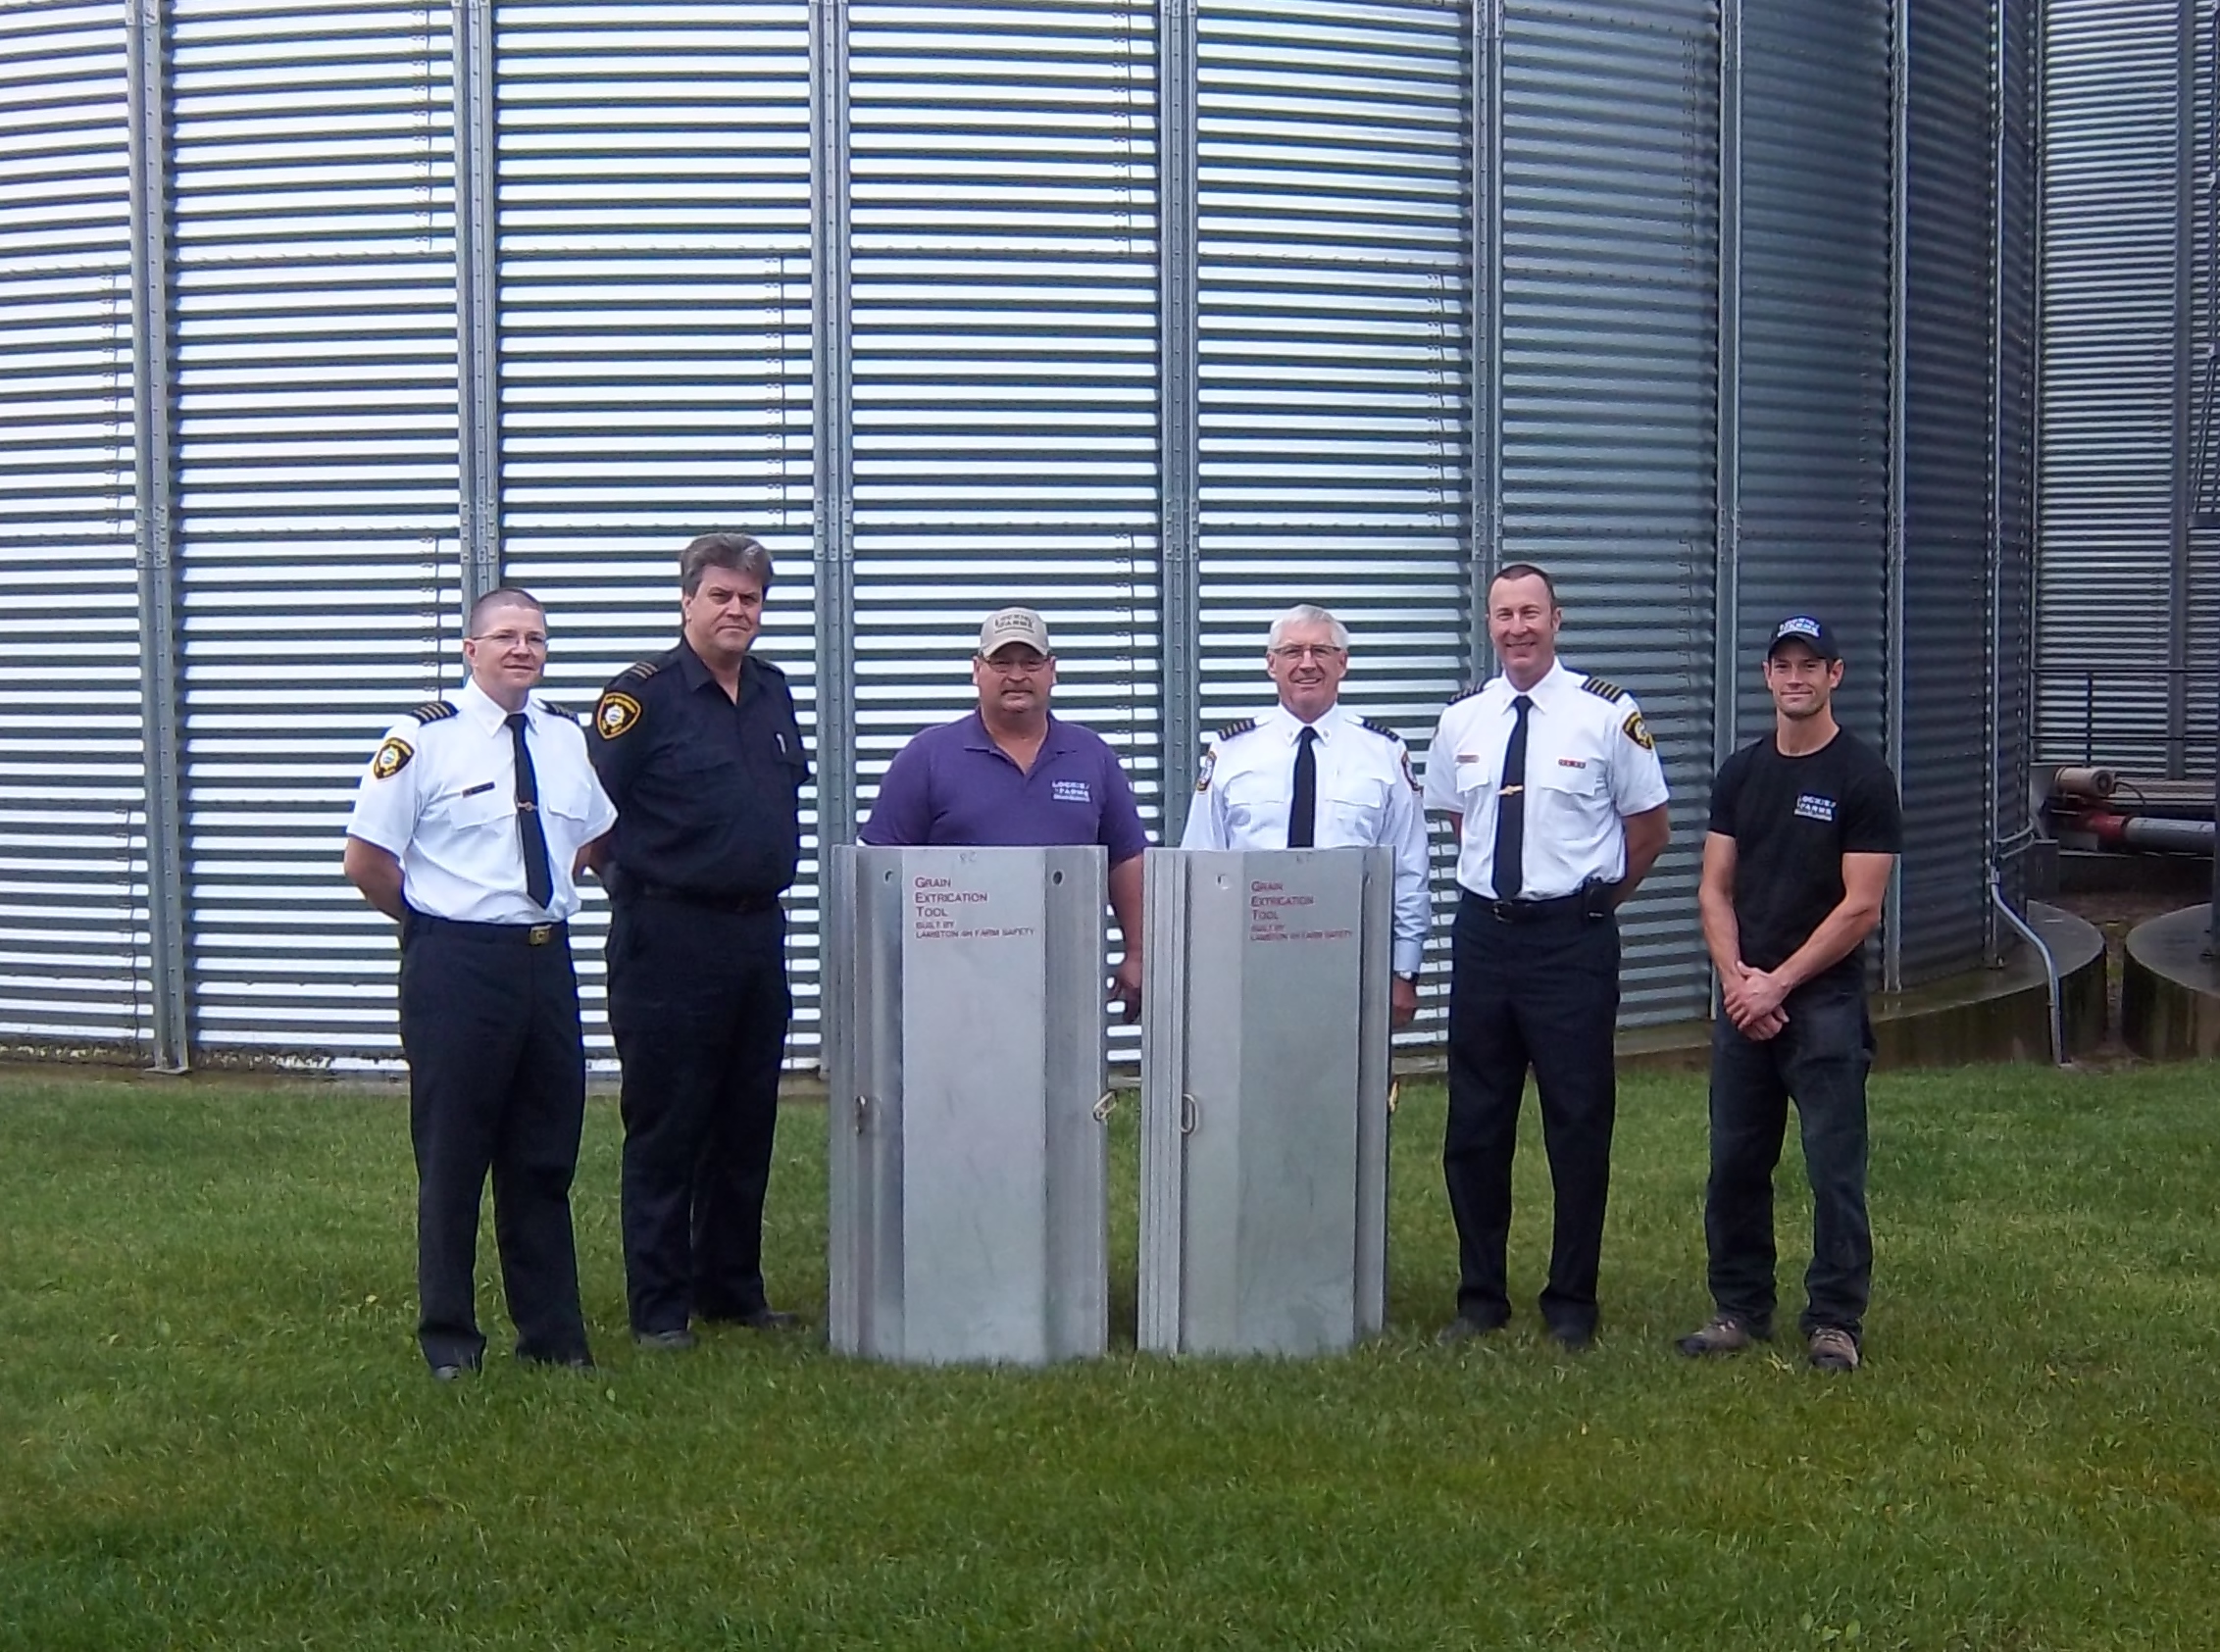 Lockie Farms was able to donate Grain Safety Extraction tools to fire departments in the area. Departments included East Gwillimbury, Uxbridge Twsp, Georgina Twsp, City of Kawartha Lakes, & Sunderland.